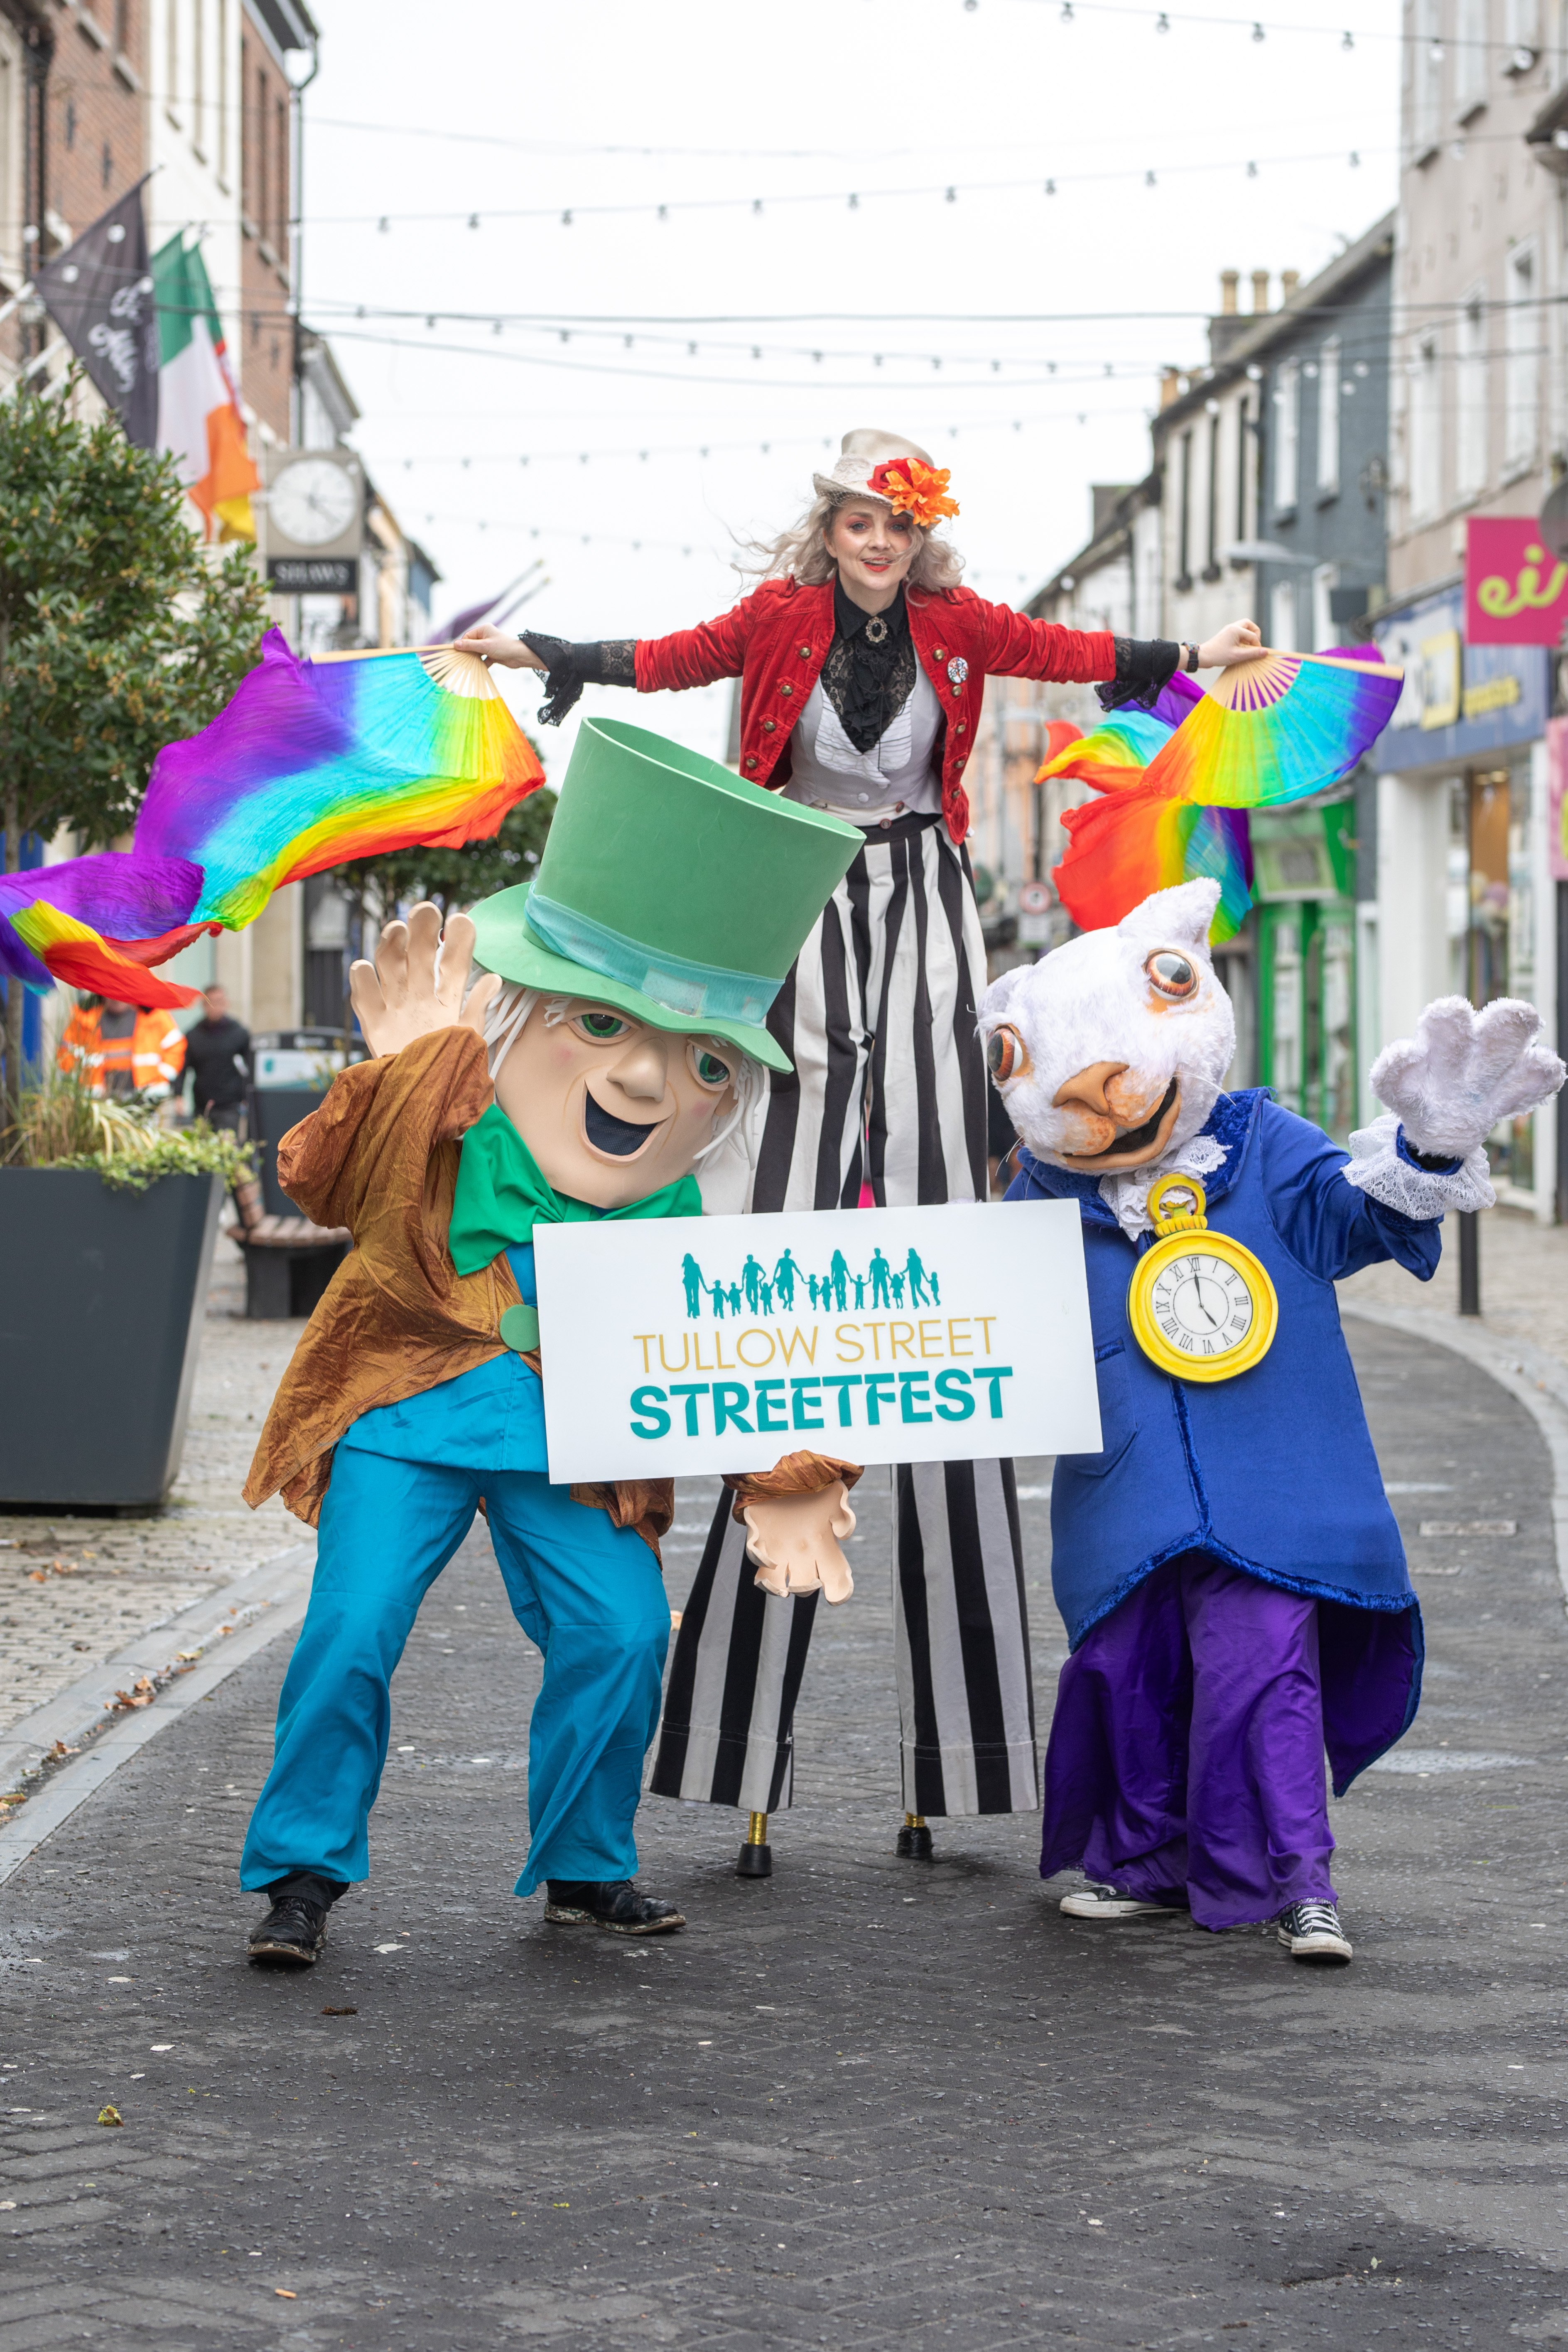 Carlow County Council – Streetfest Busking Competition Unveiled. 